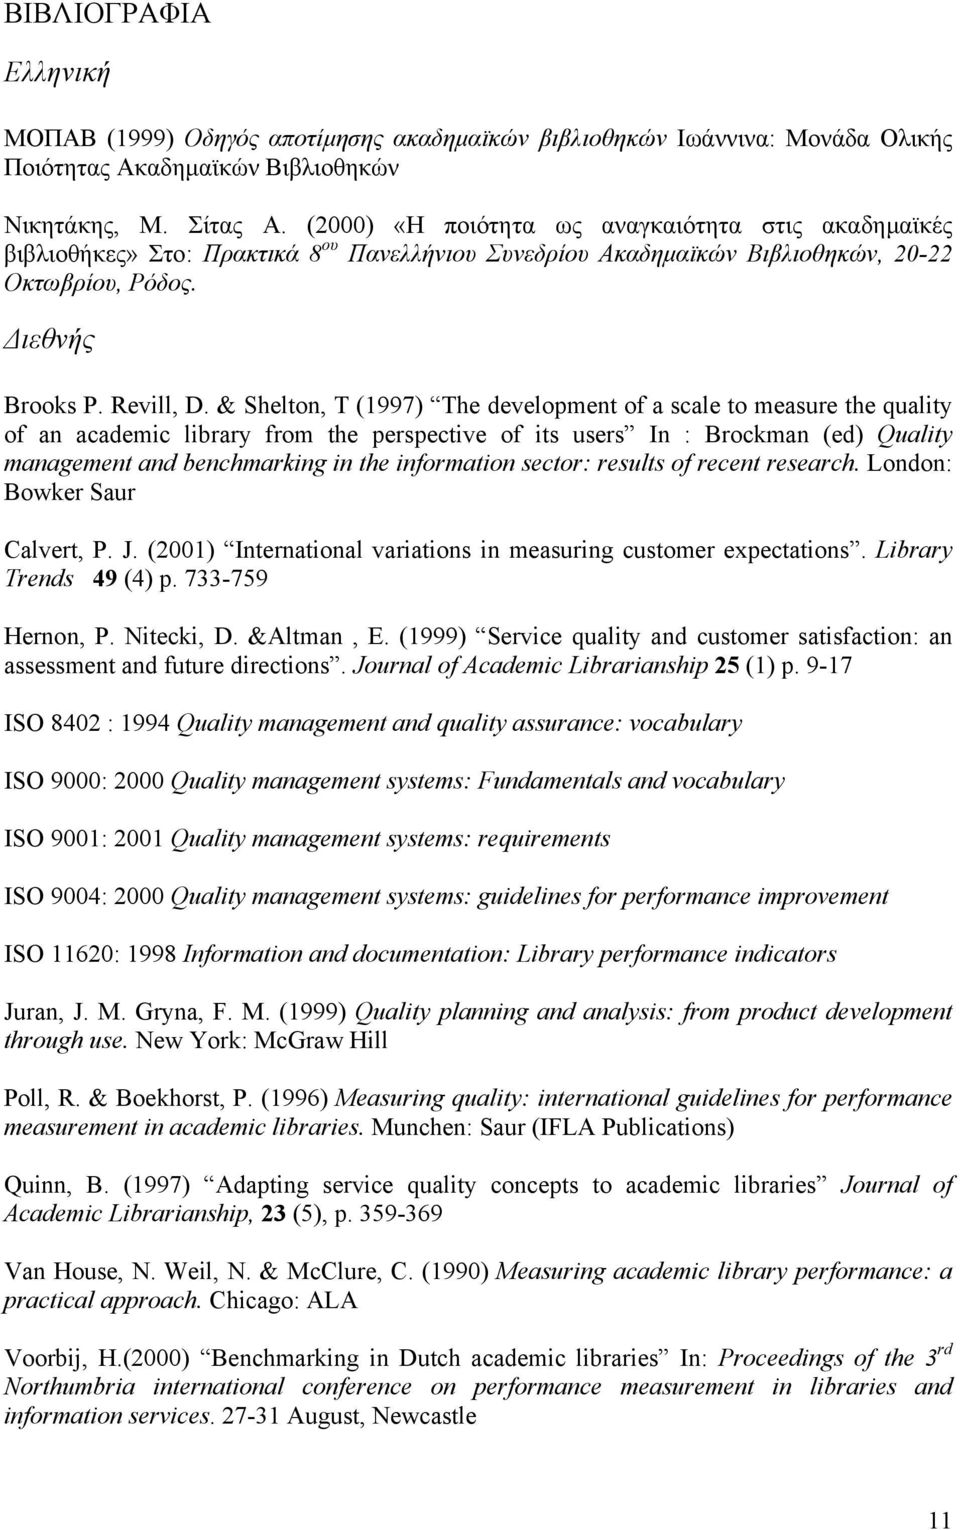 & Shelton, T (1997) The development of a scale to measure the quality of an academic library from the perspective of its users In : Brockman (ed) Quality management and benchmarking in the